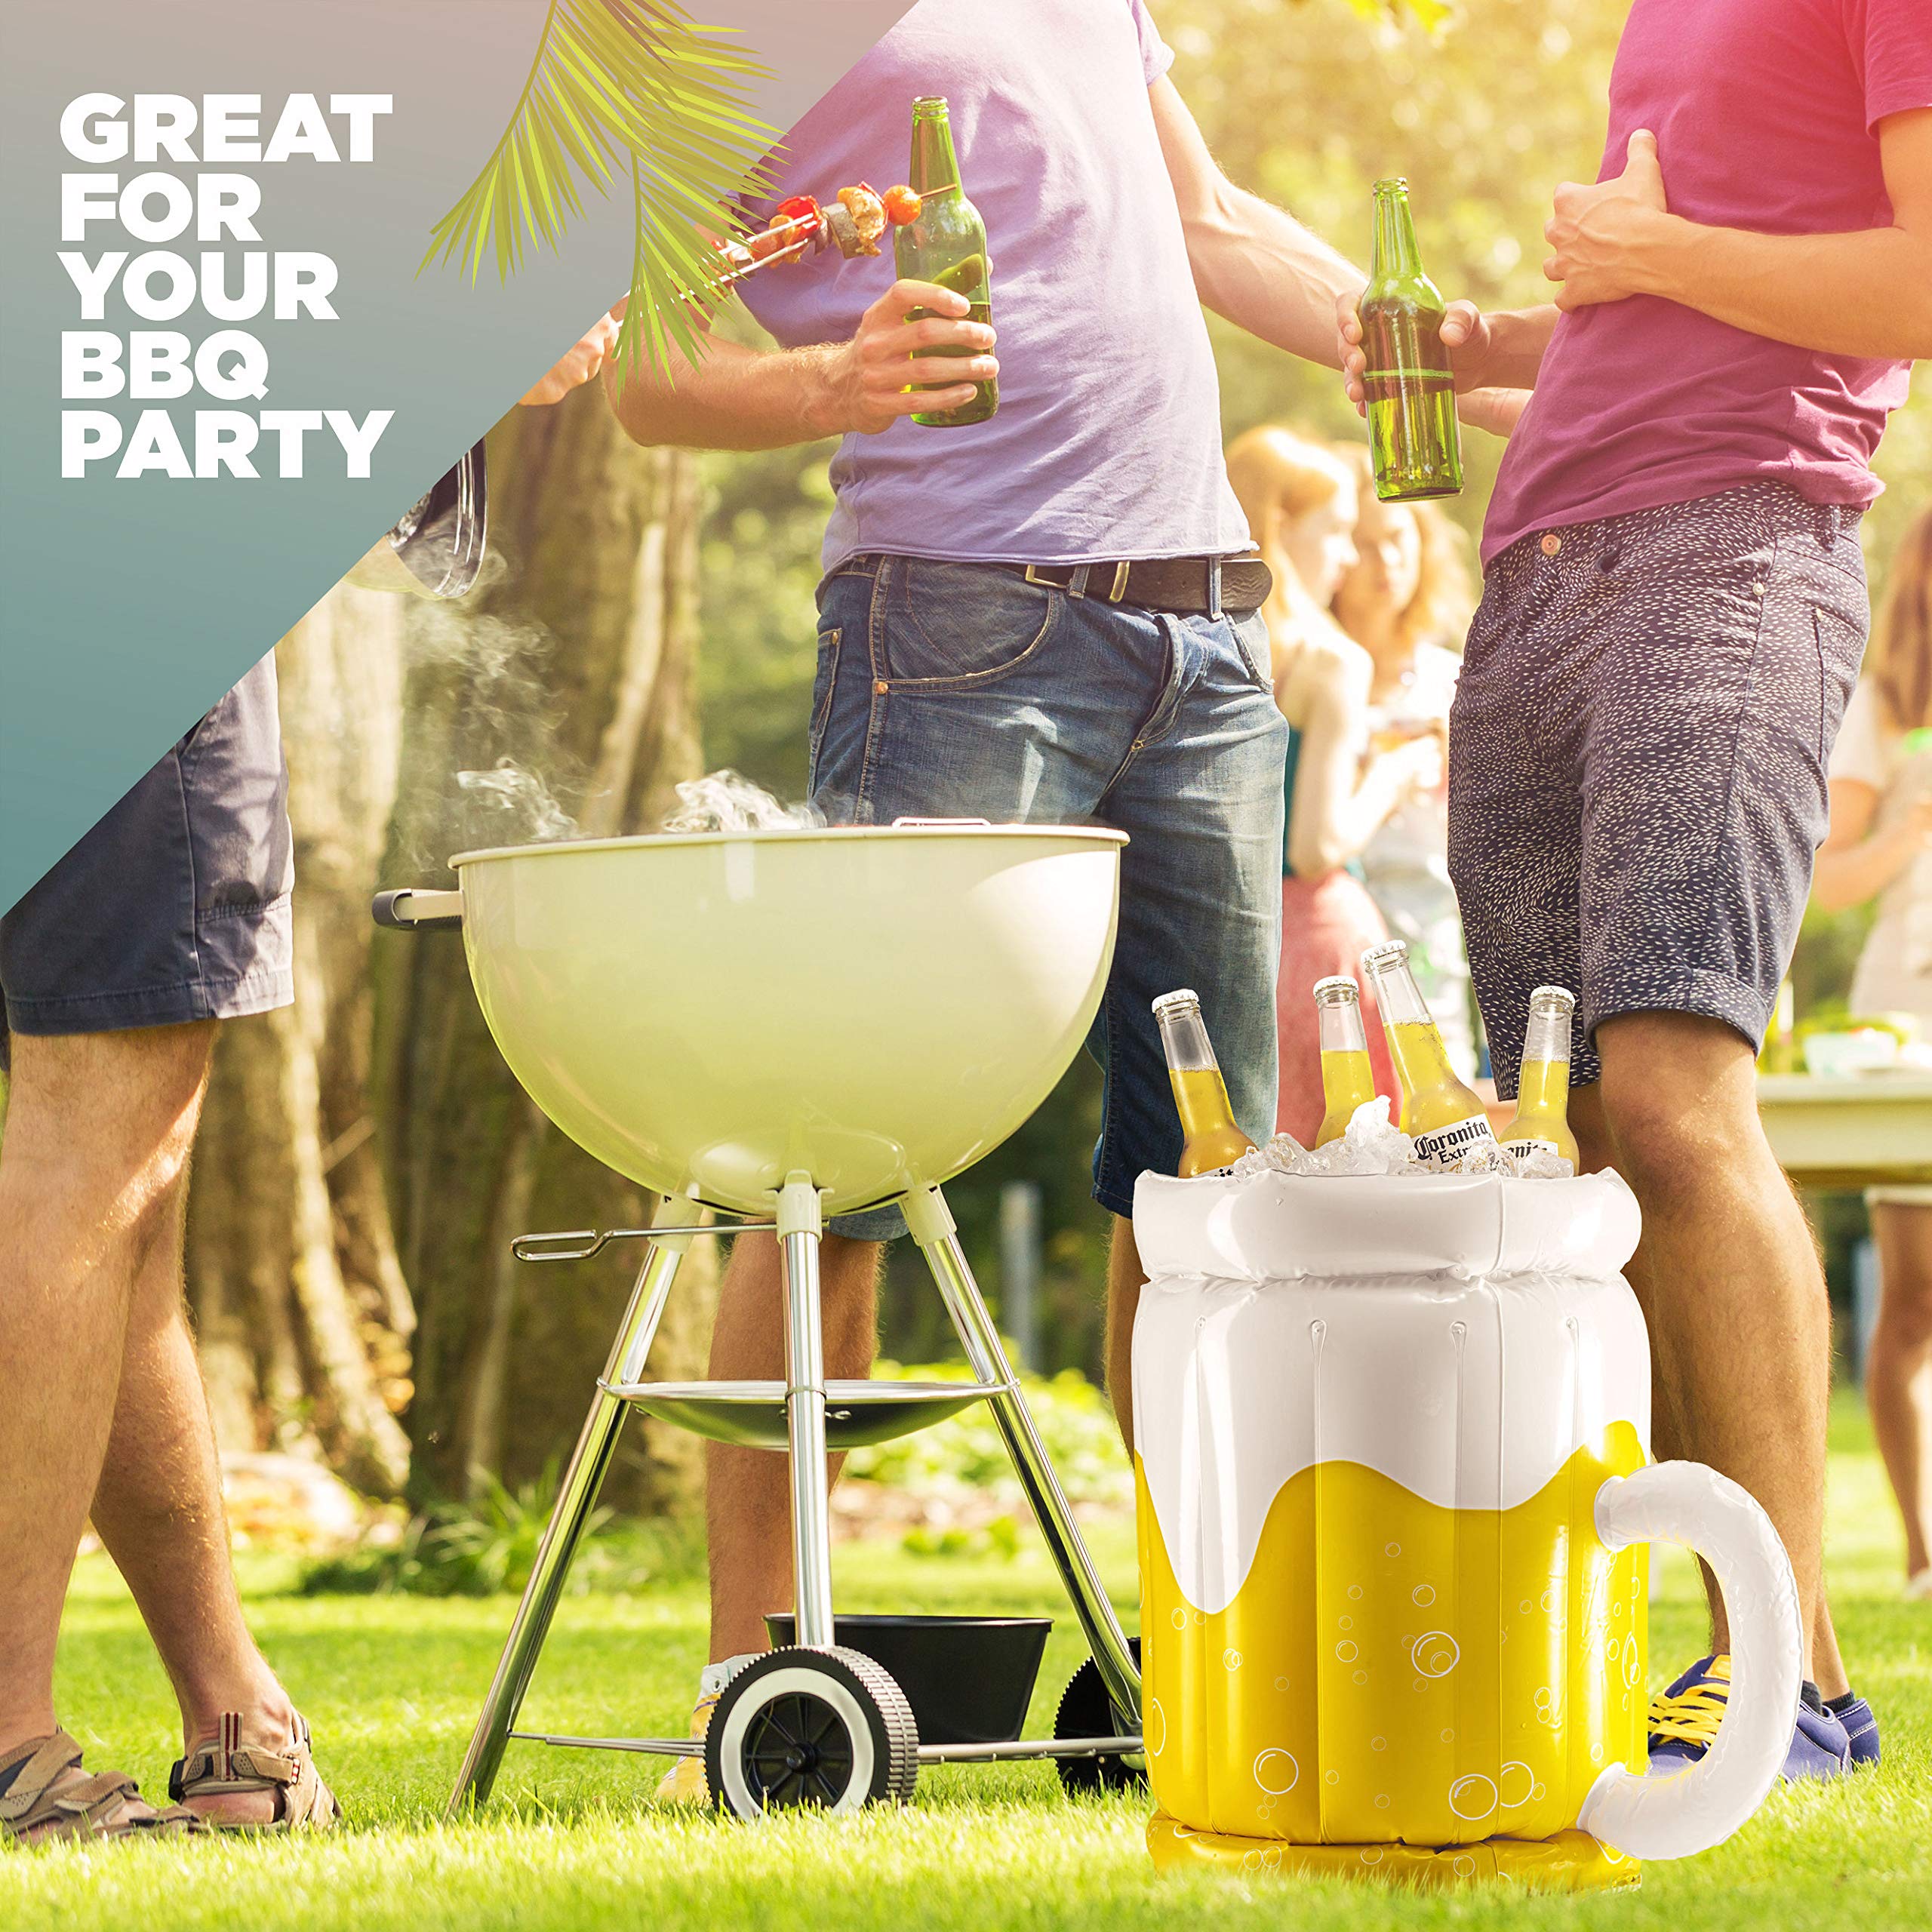 Large Inflatable Beer Mug Cooler Pool Float Drink Cooler For Adults Parties - Minihomy